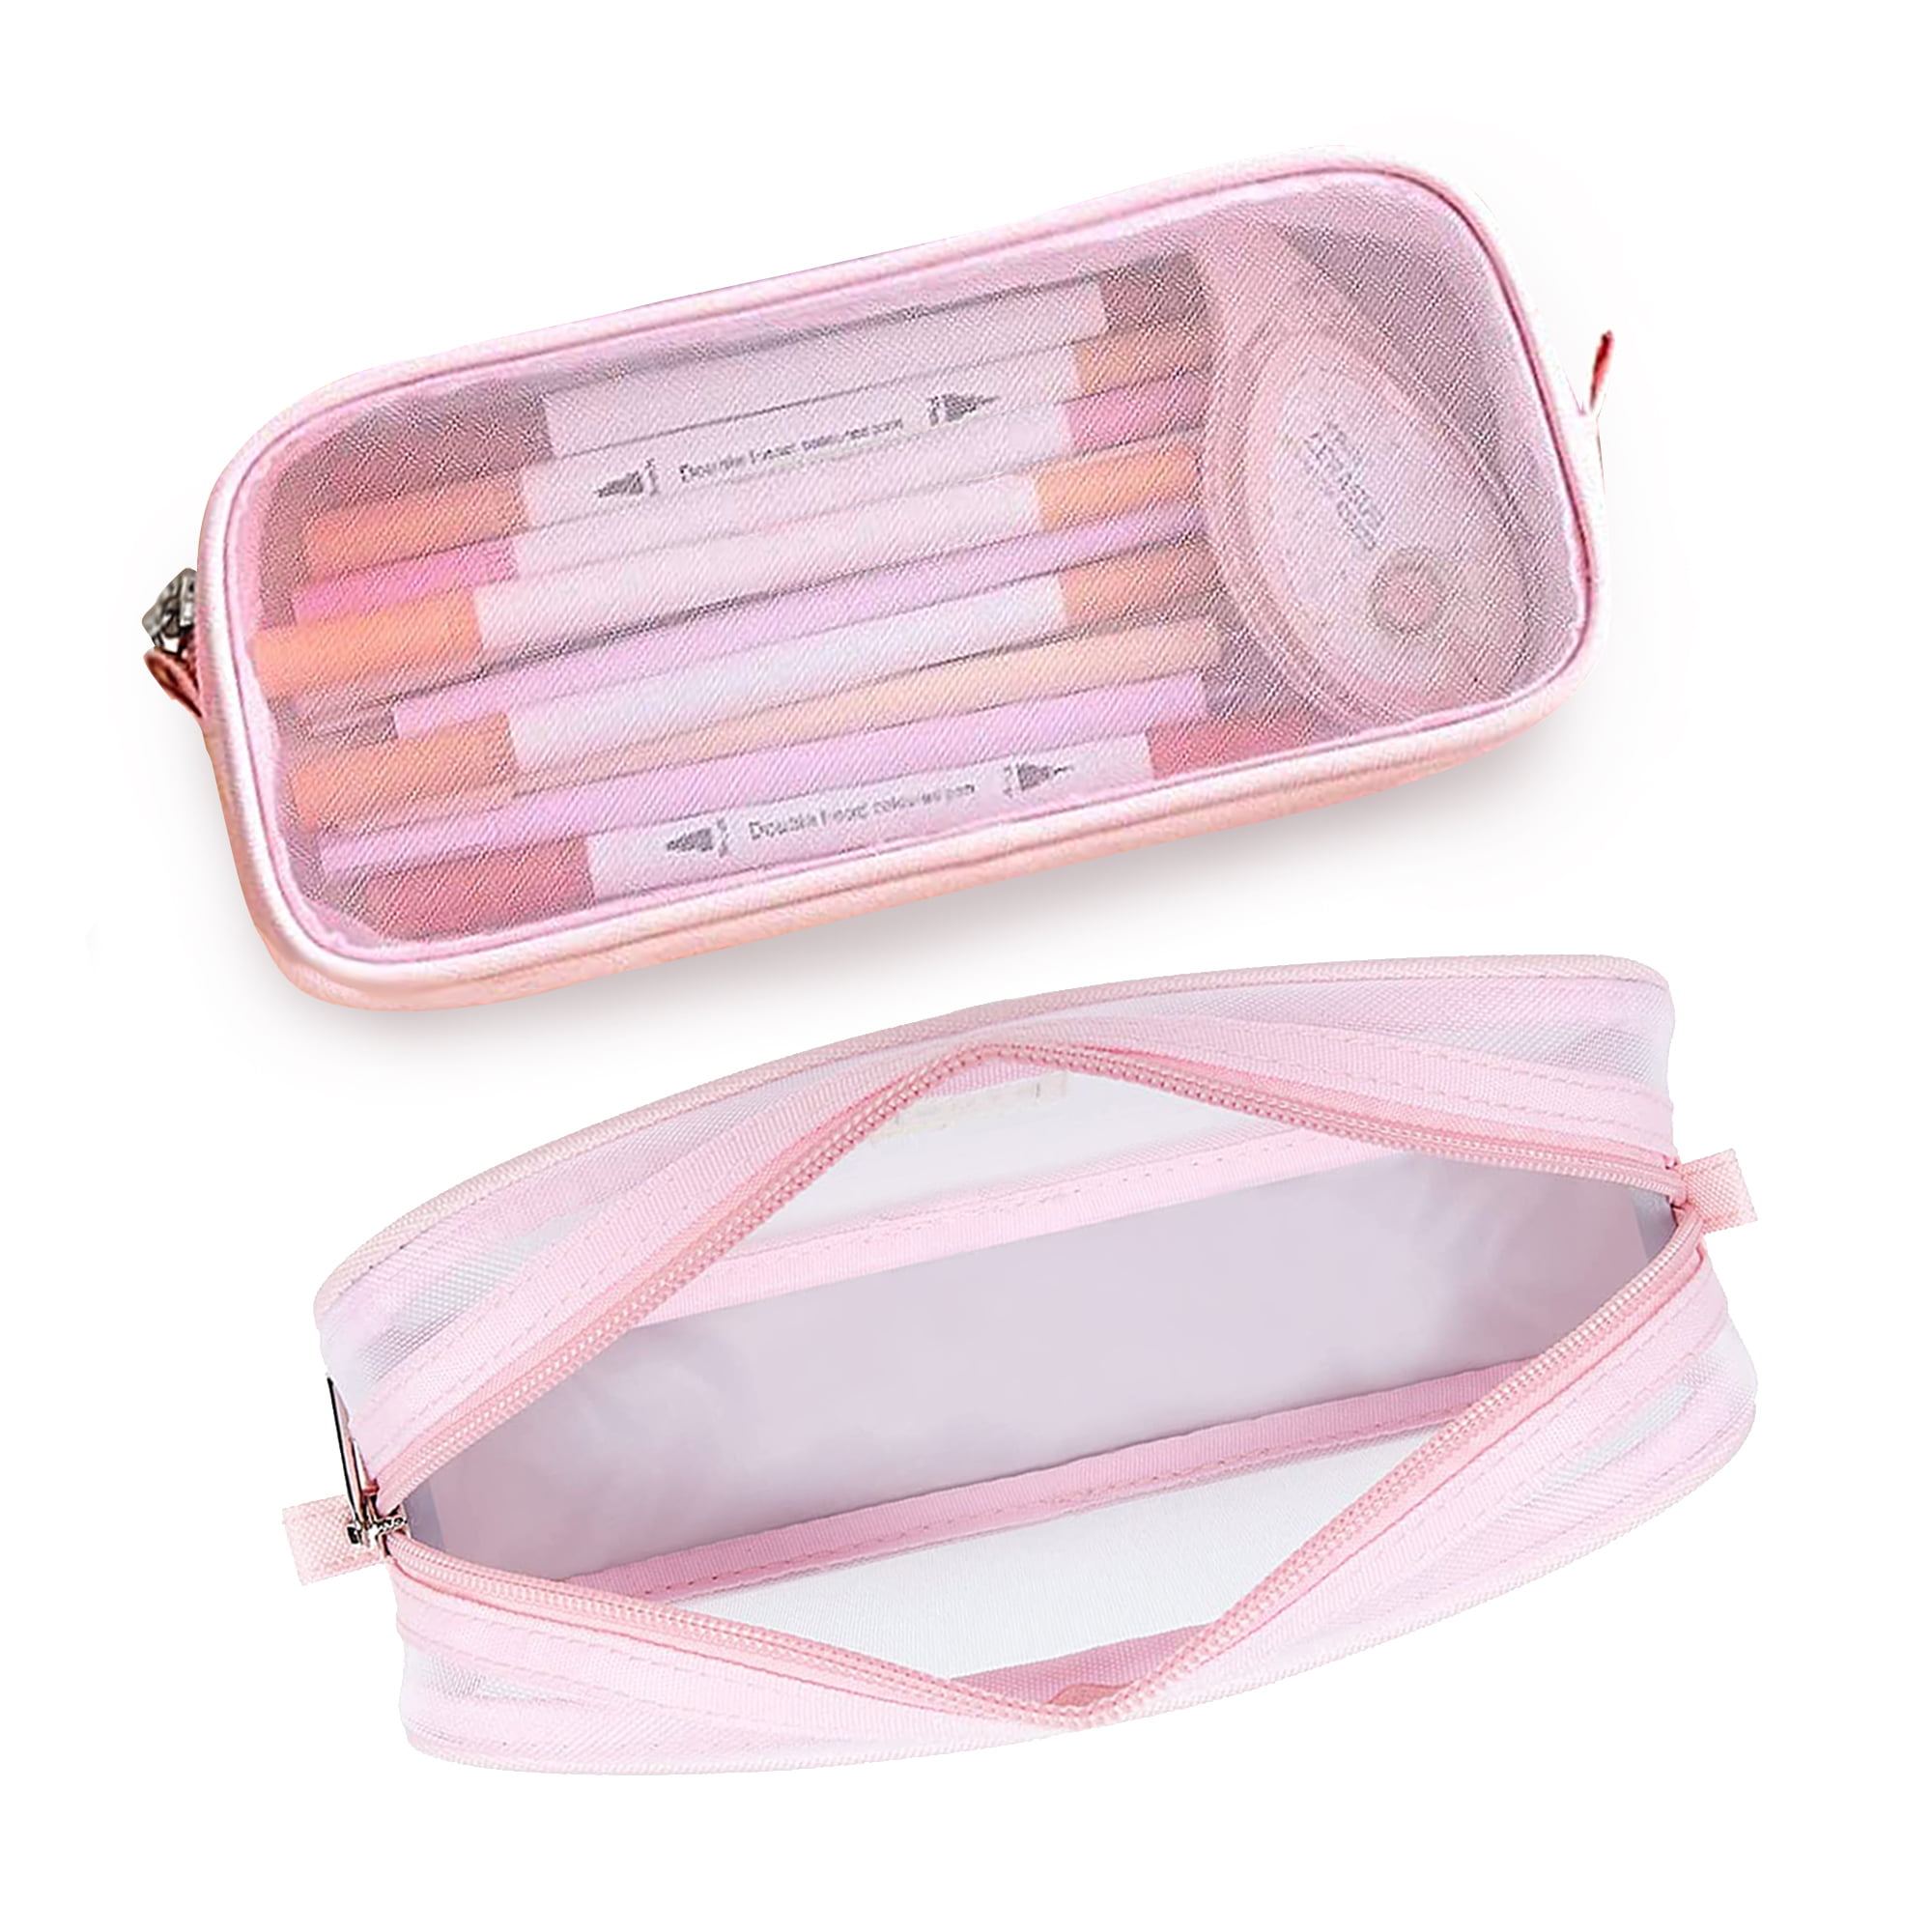 Buy Ofsign Pencil Pouch for Boys— Pencil Case for Girls, School, Student,  Embossed Pen Case Holder with Dual Zipper Mesh Pocket, Hard Top Pencil Box  for Kids, Birthday Gifts, Stationary Pouch 